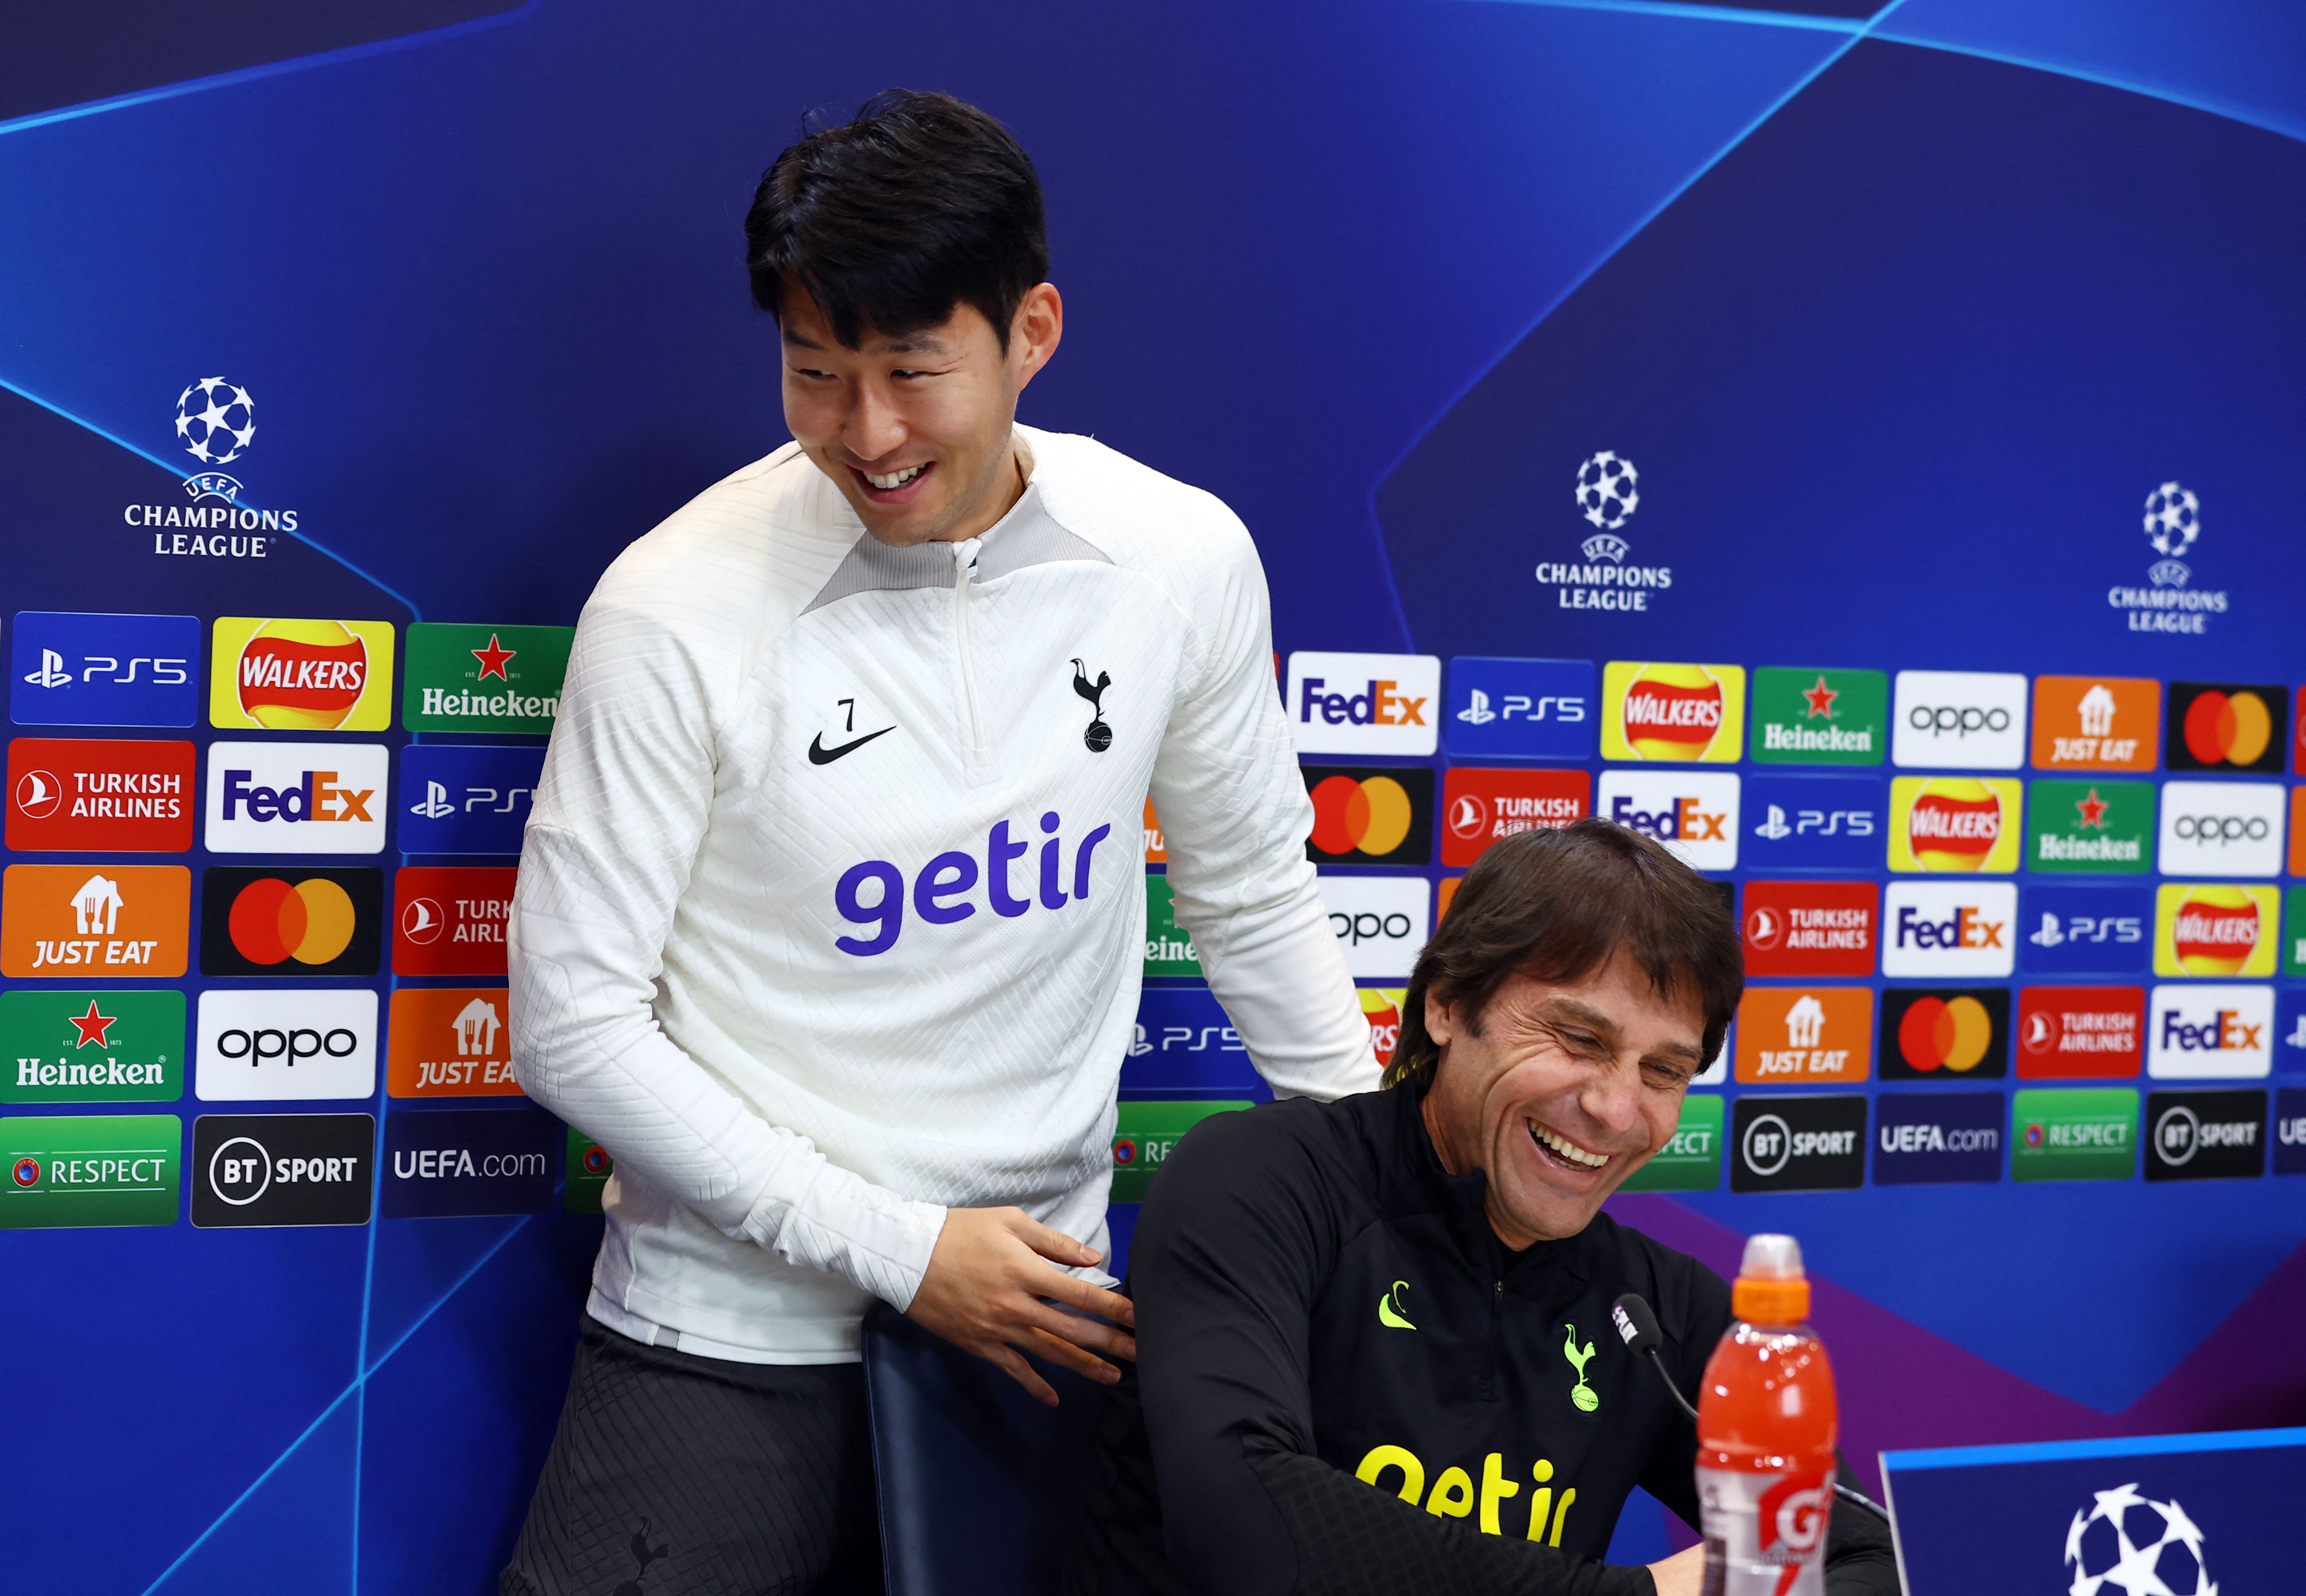 Tottenham Hotspur manager Antonio Conte and Son Heung-min during the press conference